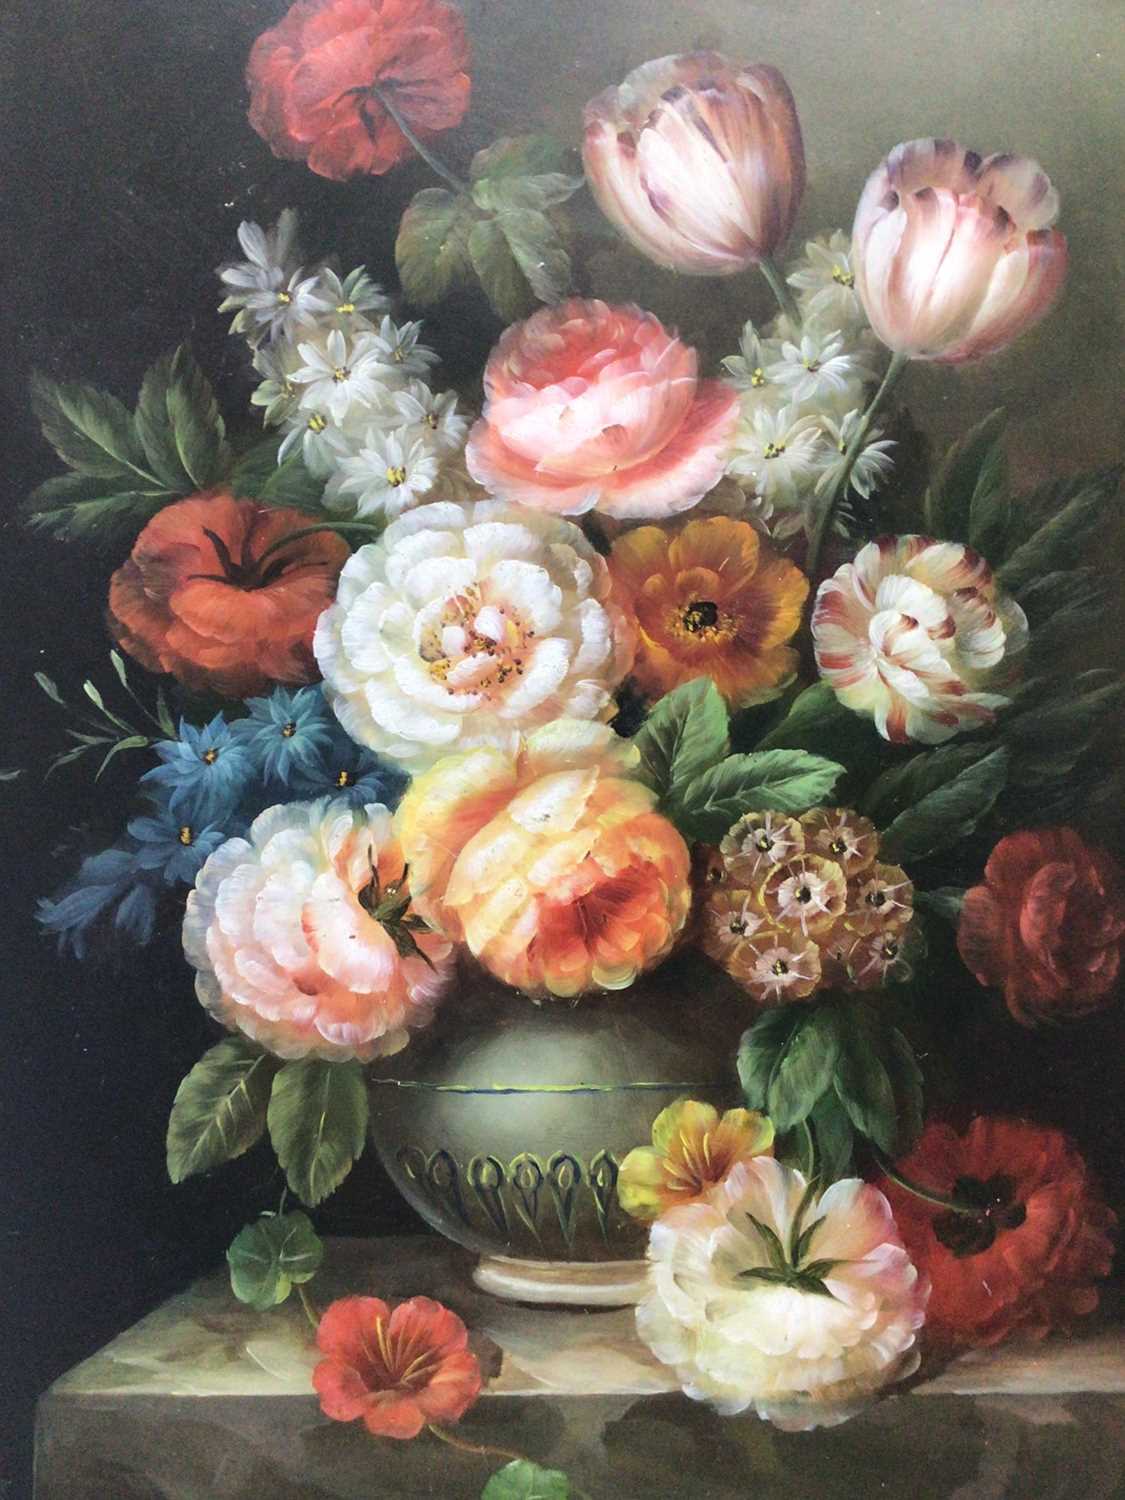 Lot 142 - Attributed to Thomas Webster, pair of oils on panel - Flower Pieces, 41cm x 30.5cm, unframed